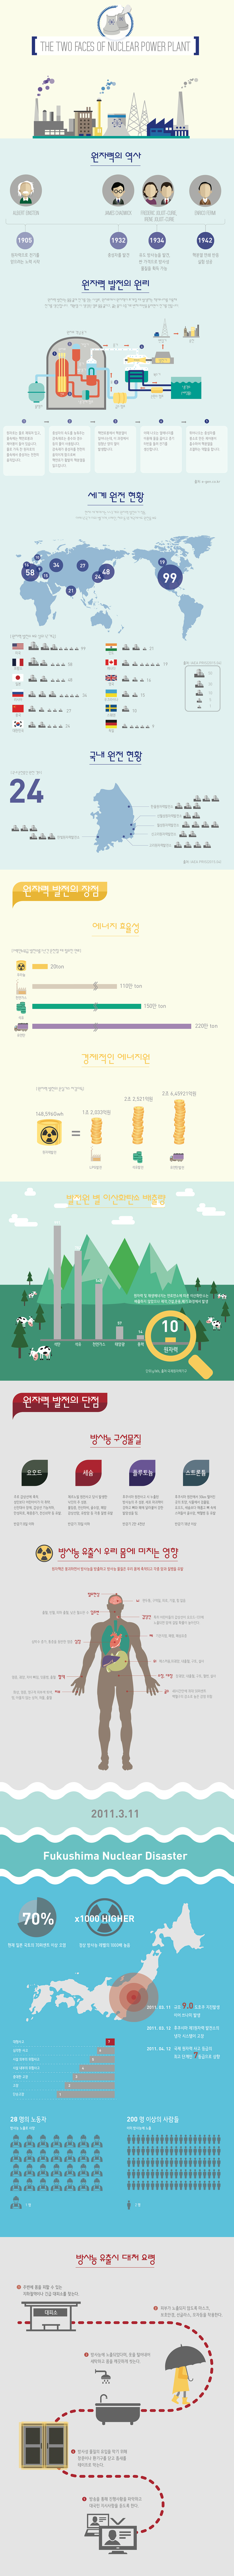 infographics infographic graphicdesign